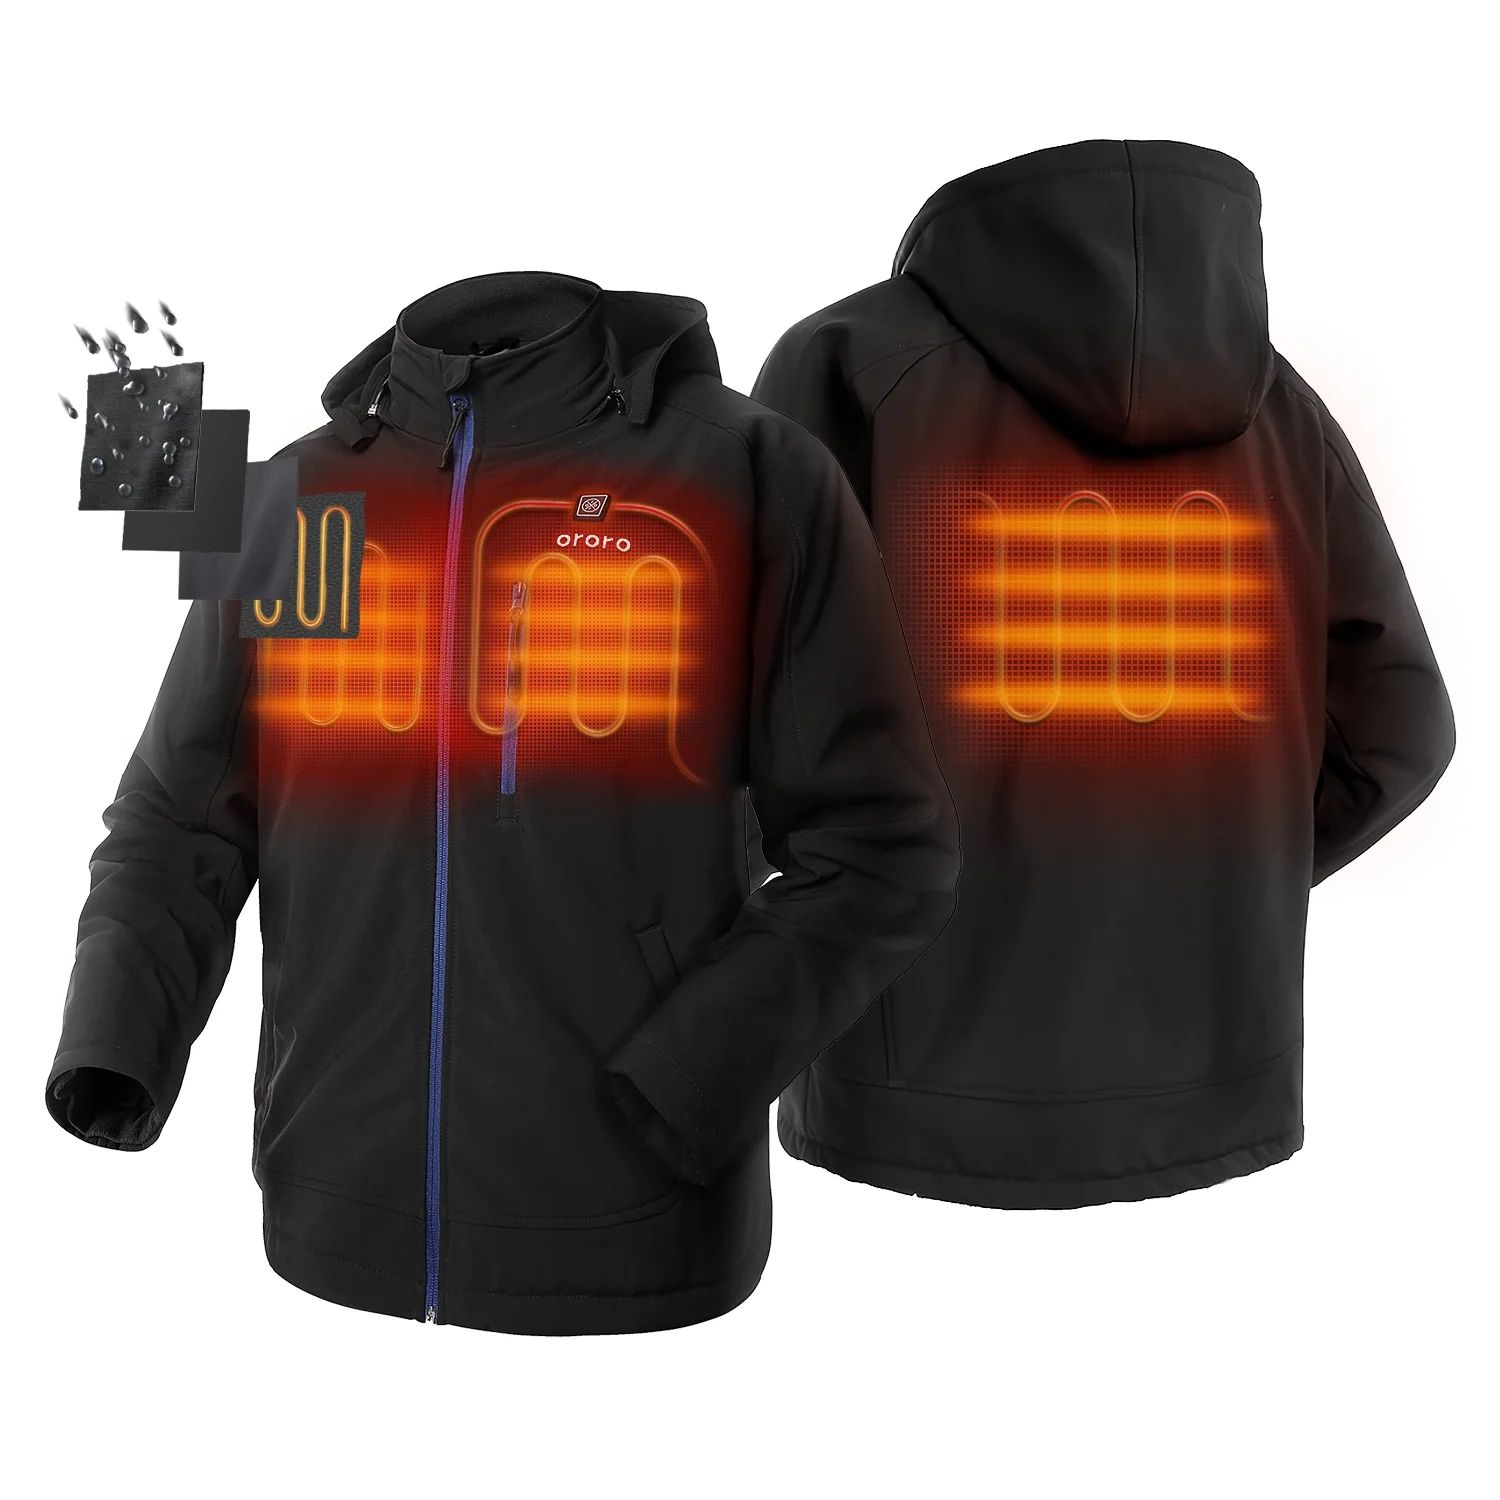 ORORO Men's Heated Jacket Kit With Detachable Hood and Battery Pack | Walmart (US)